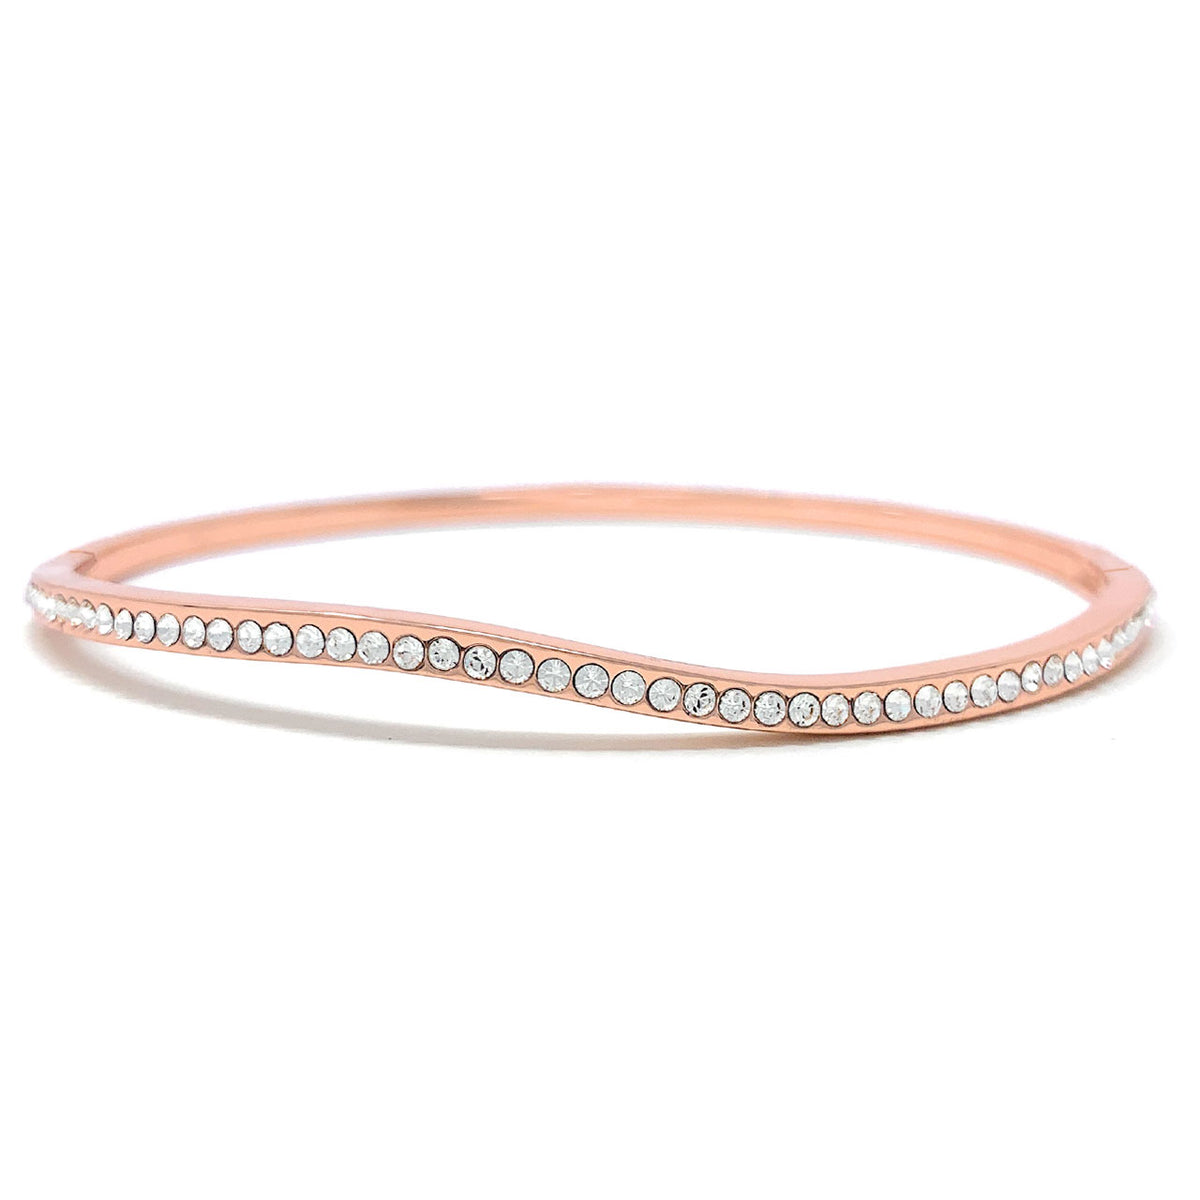 Amelia Curve Pave Bangle Bracelet with White Clear Round Crystals from Swarovski Rose Gold Plated - Ed Heart